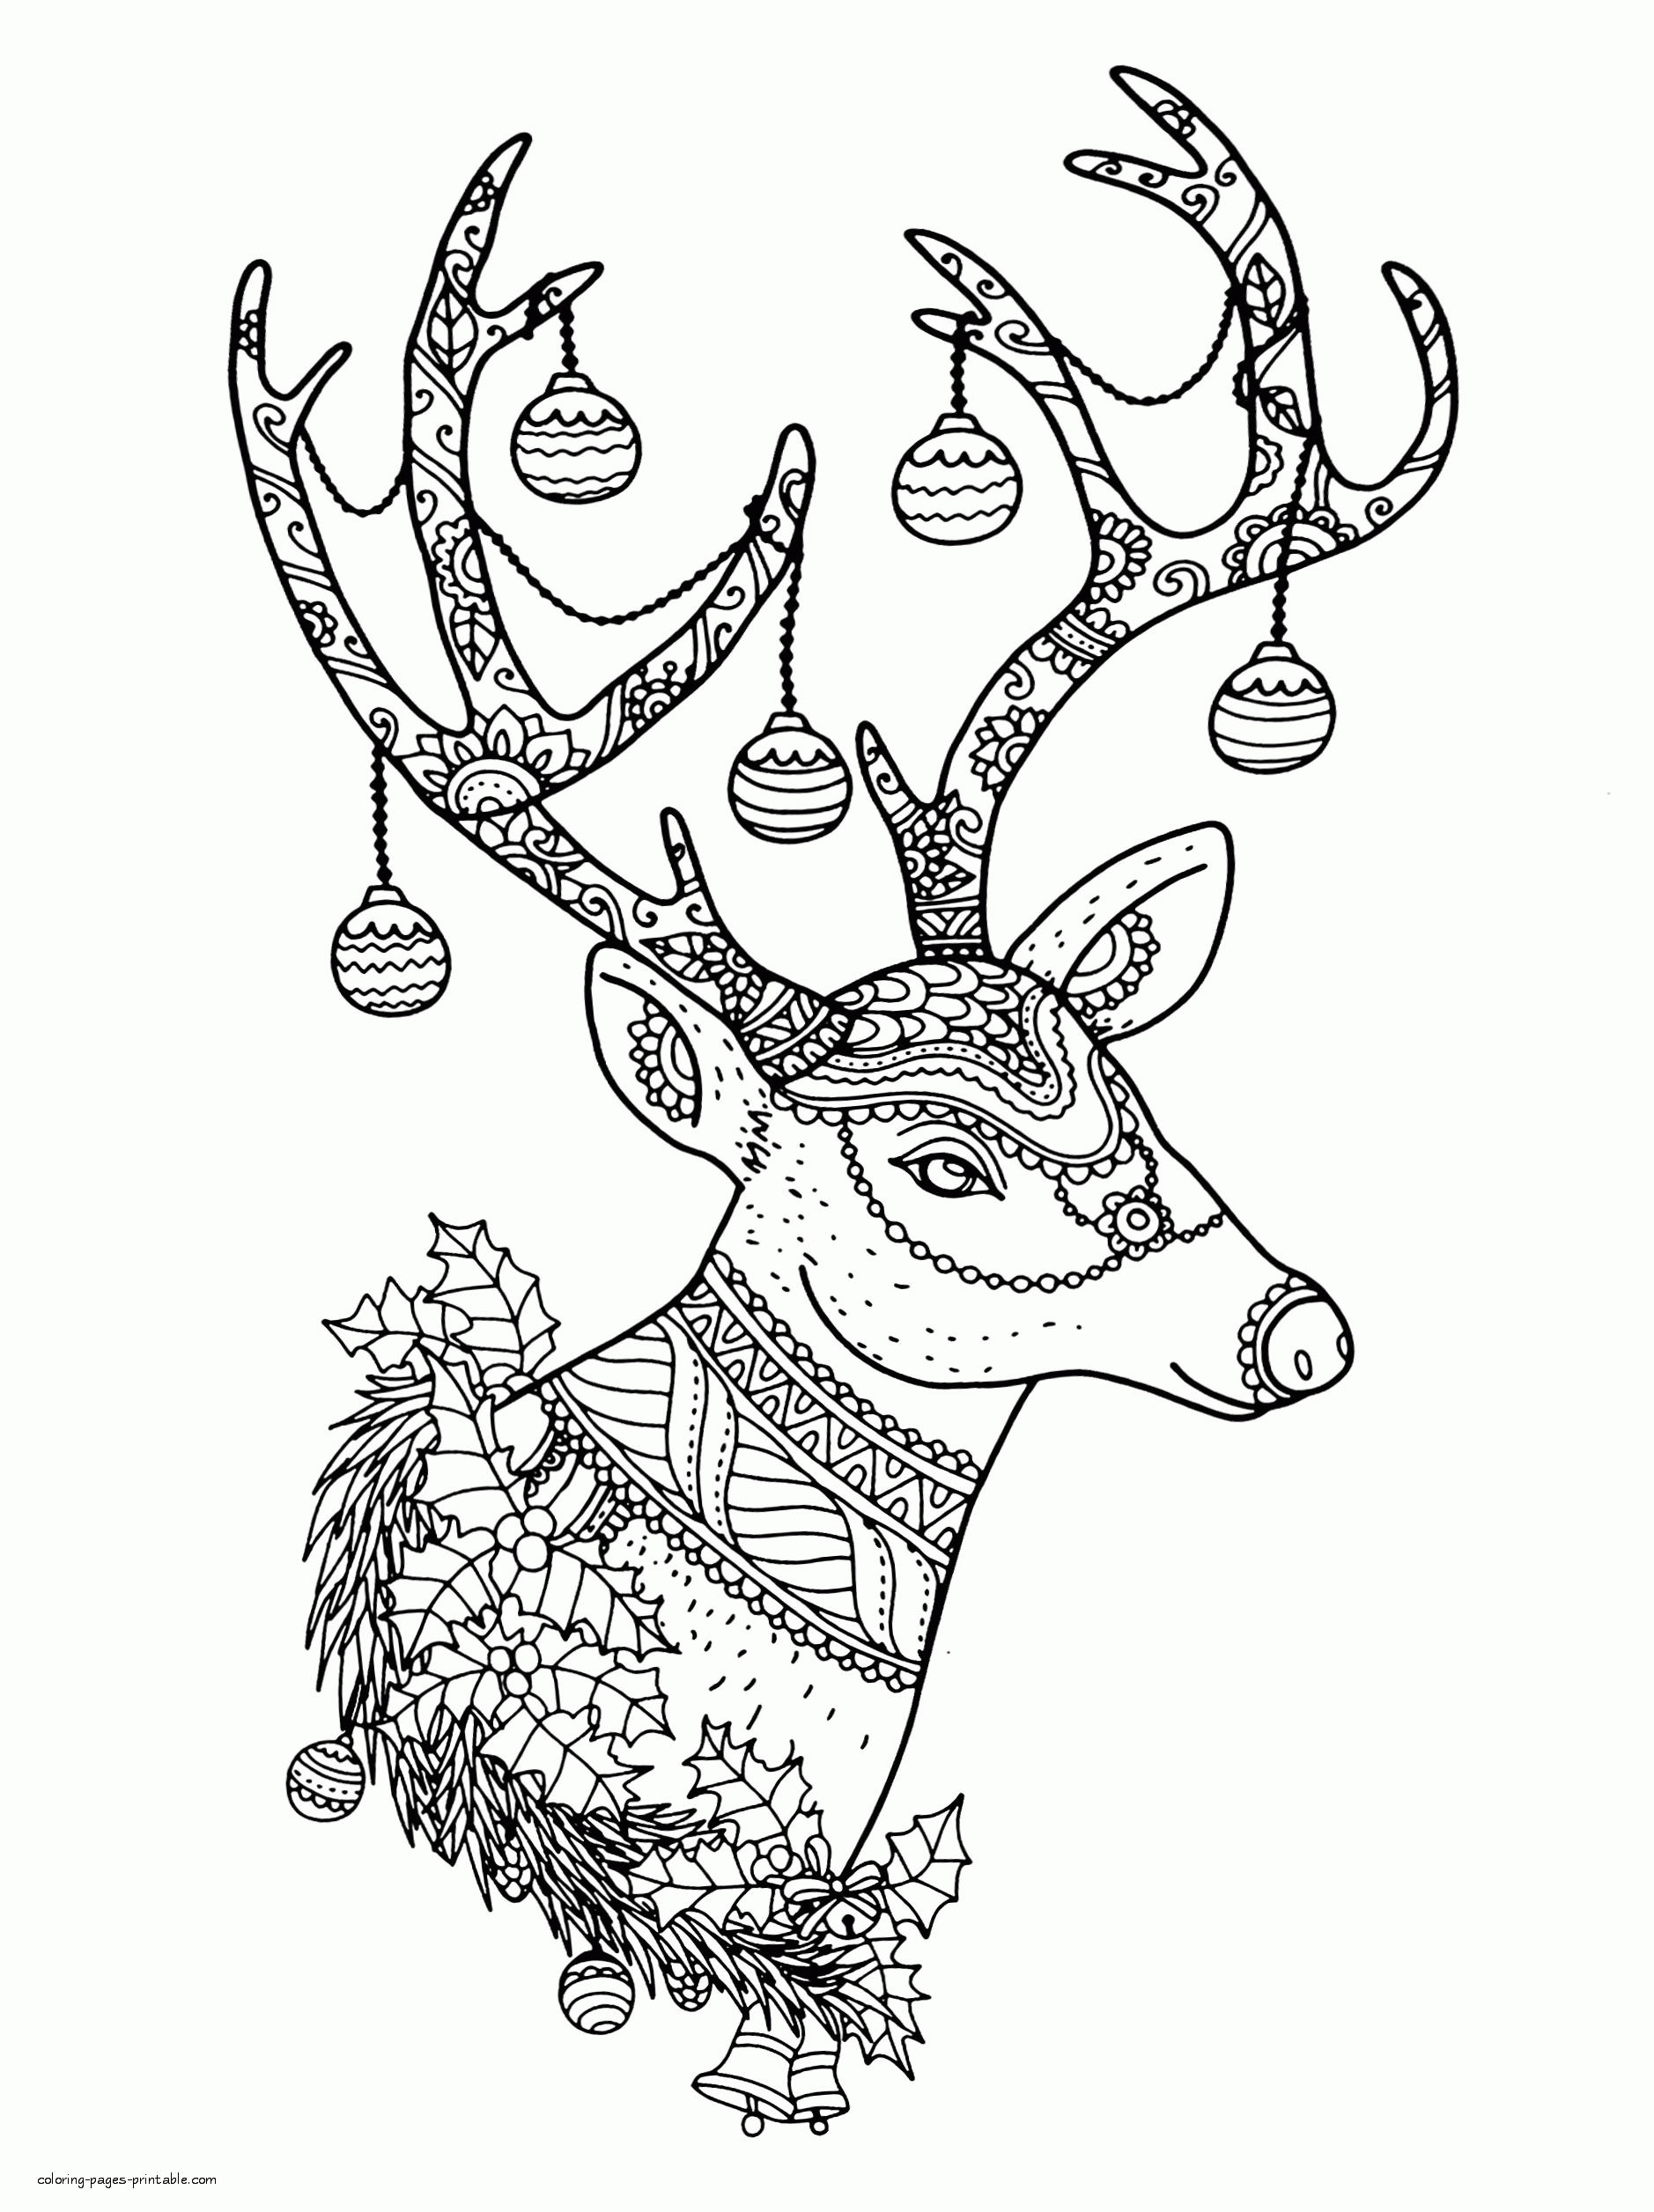 23 Of the Best Ideas for Reindeer Coloring Pages for Adults - Home